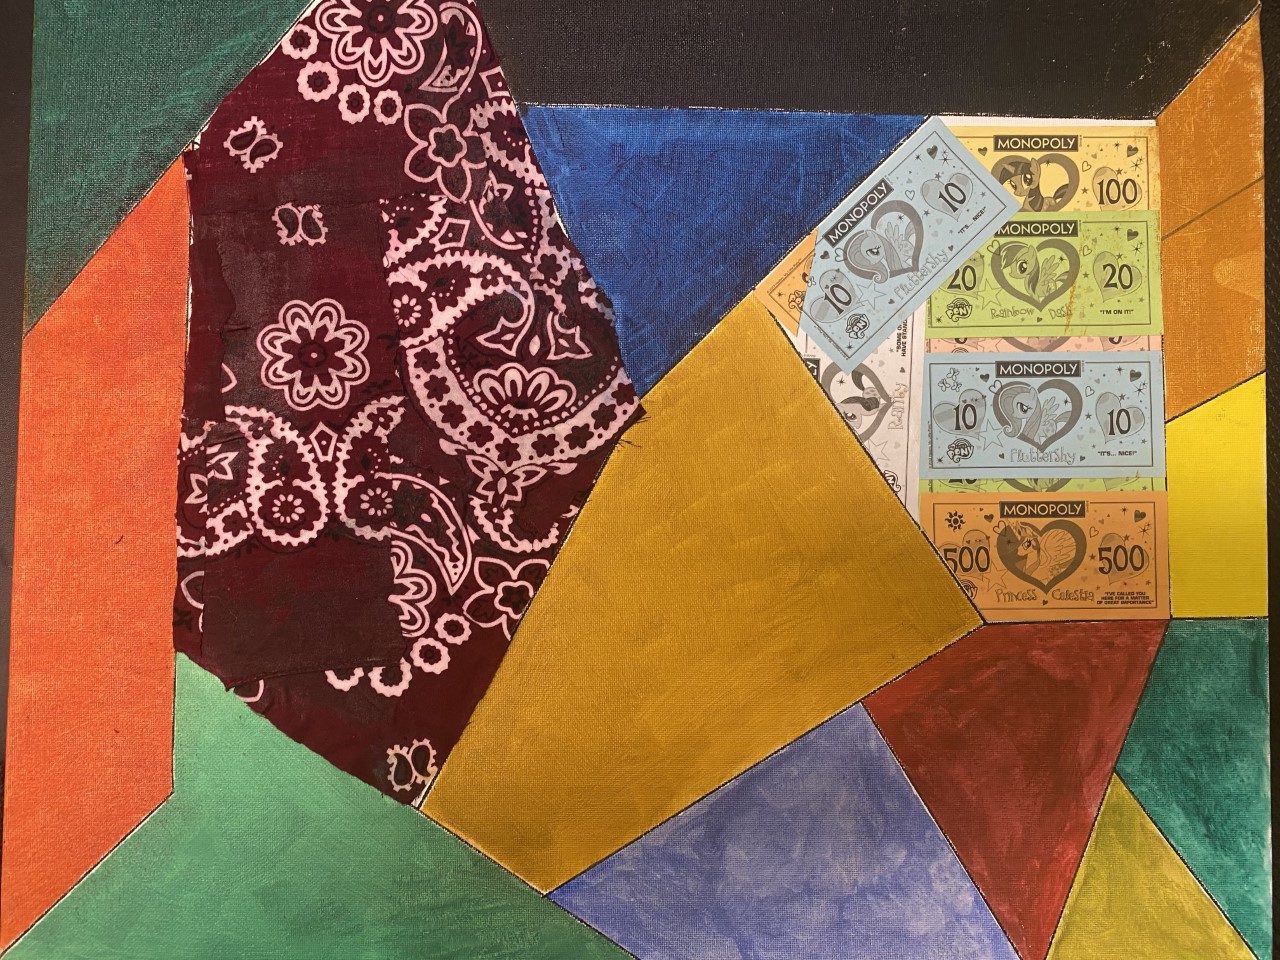 A multimedia artwork that combines colorful painted shapes, a red paisley bandanna, and pastel Monopoly money.